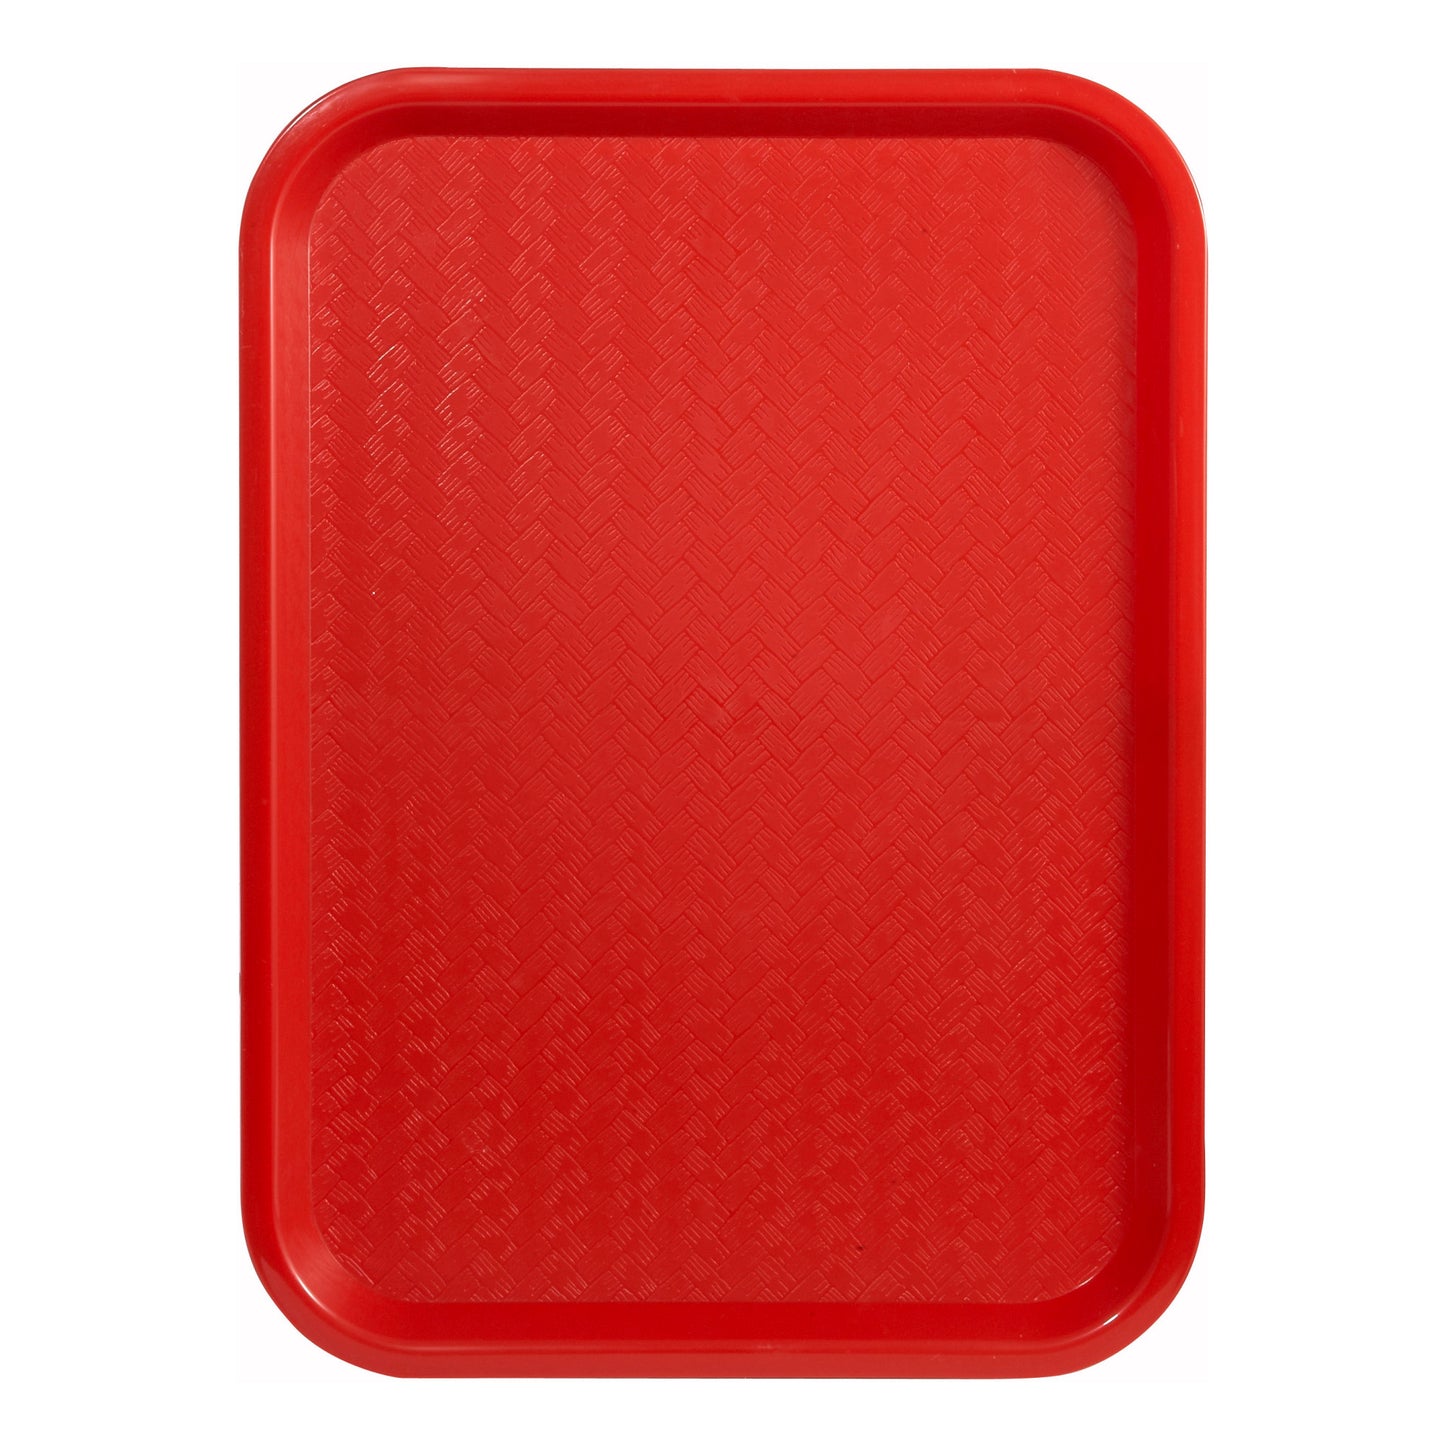 FFT-1014R - High Quality Plastic Cafeteria Tray - 10" x 14", Red